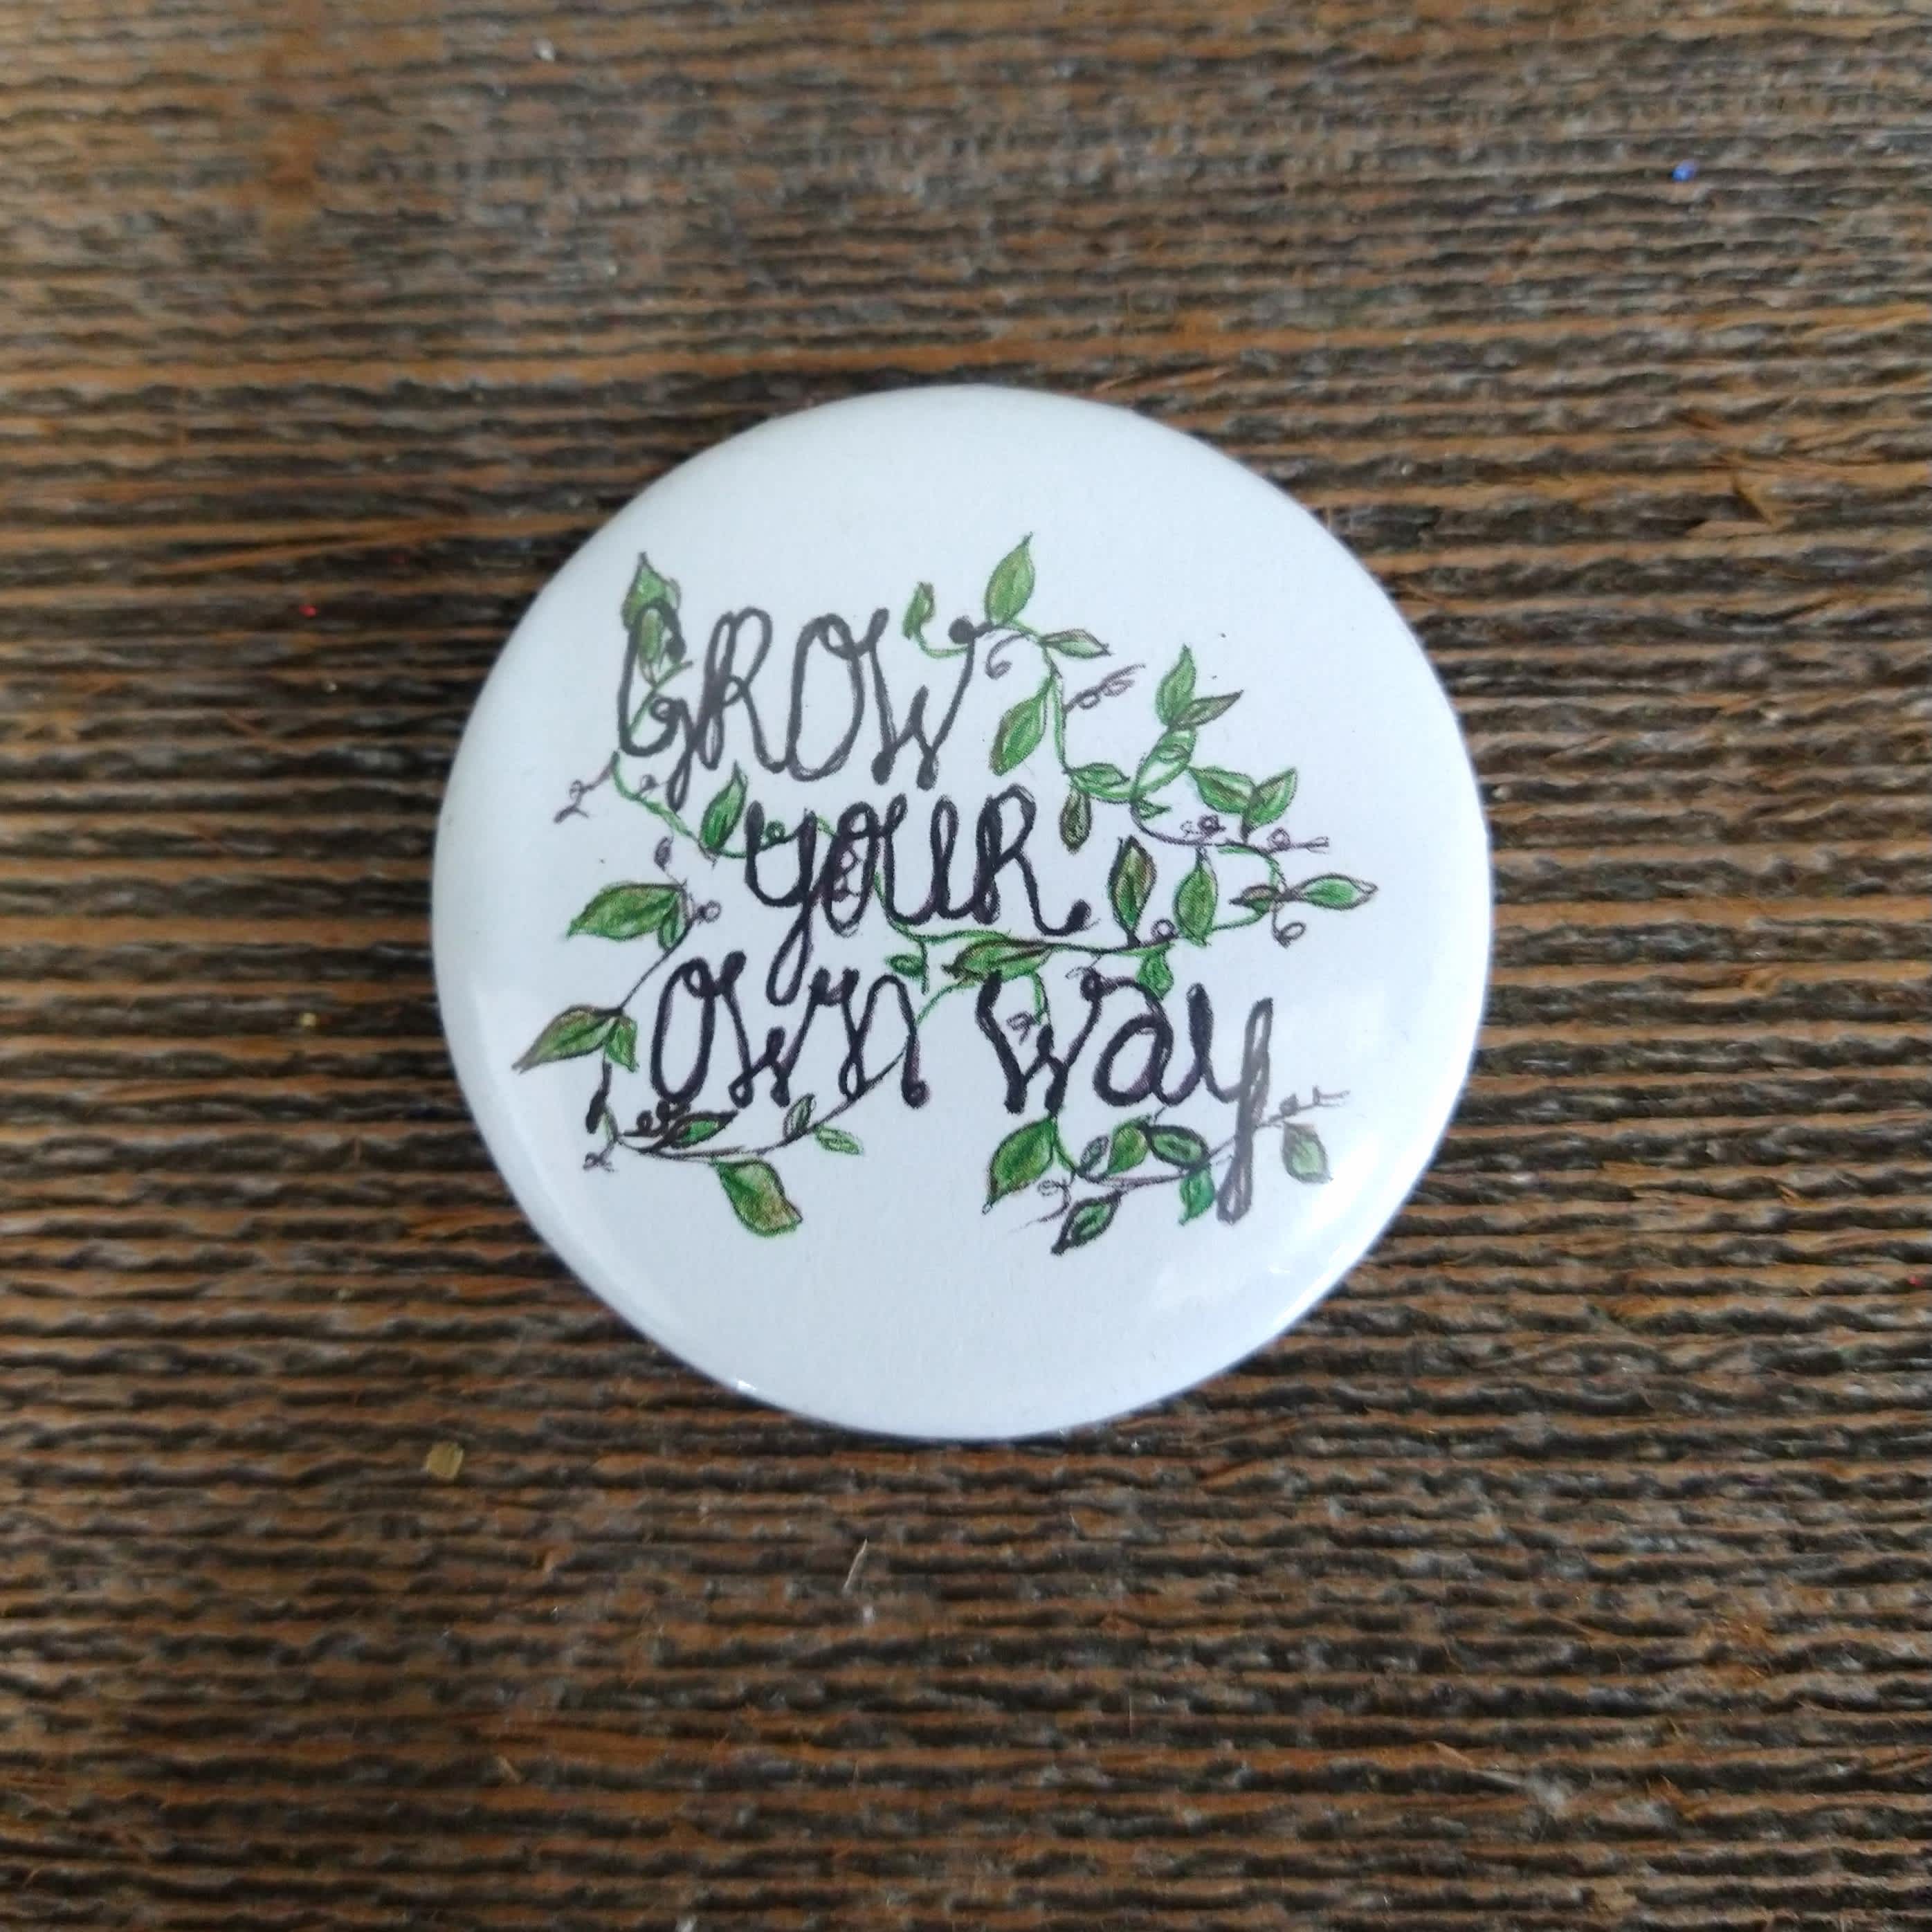 Grow your own Way Pin - Hand-made buttons created by a Courtney Calkins, a Humboldt native. 